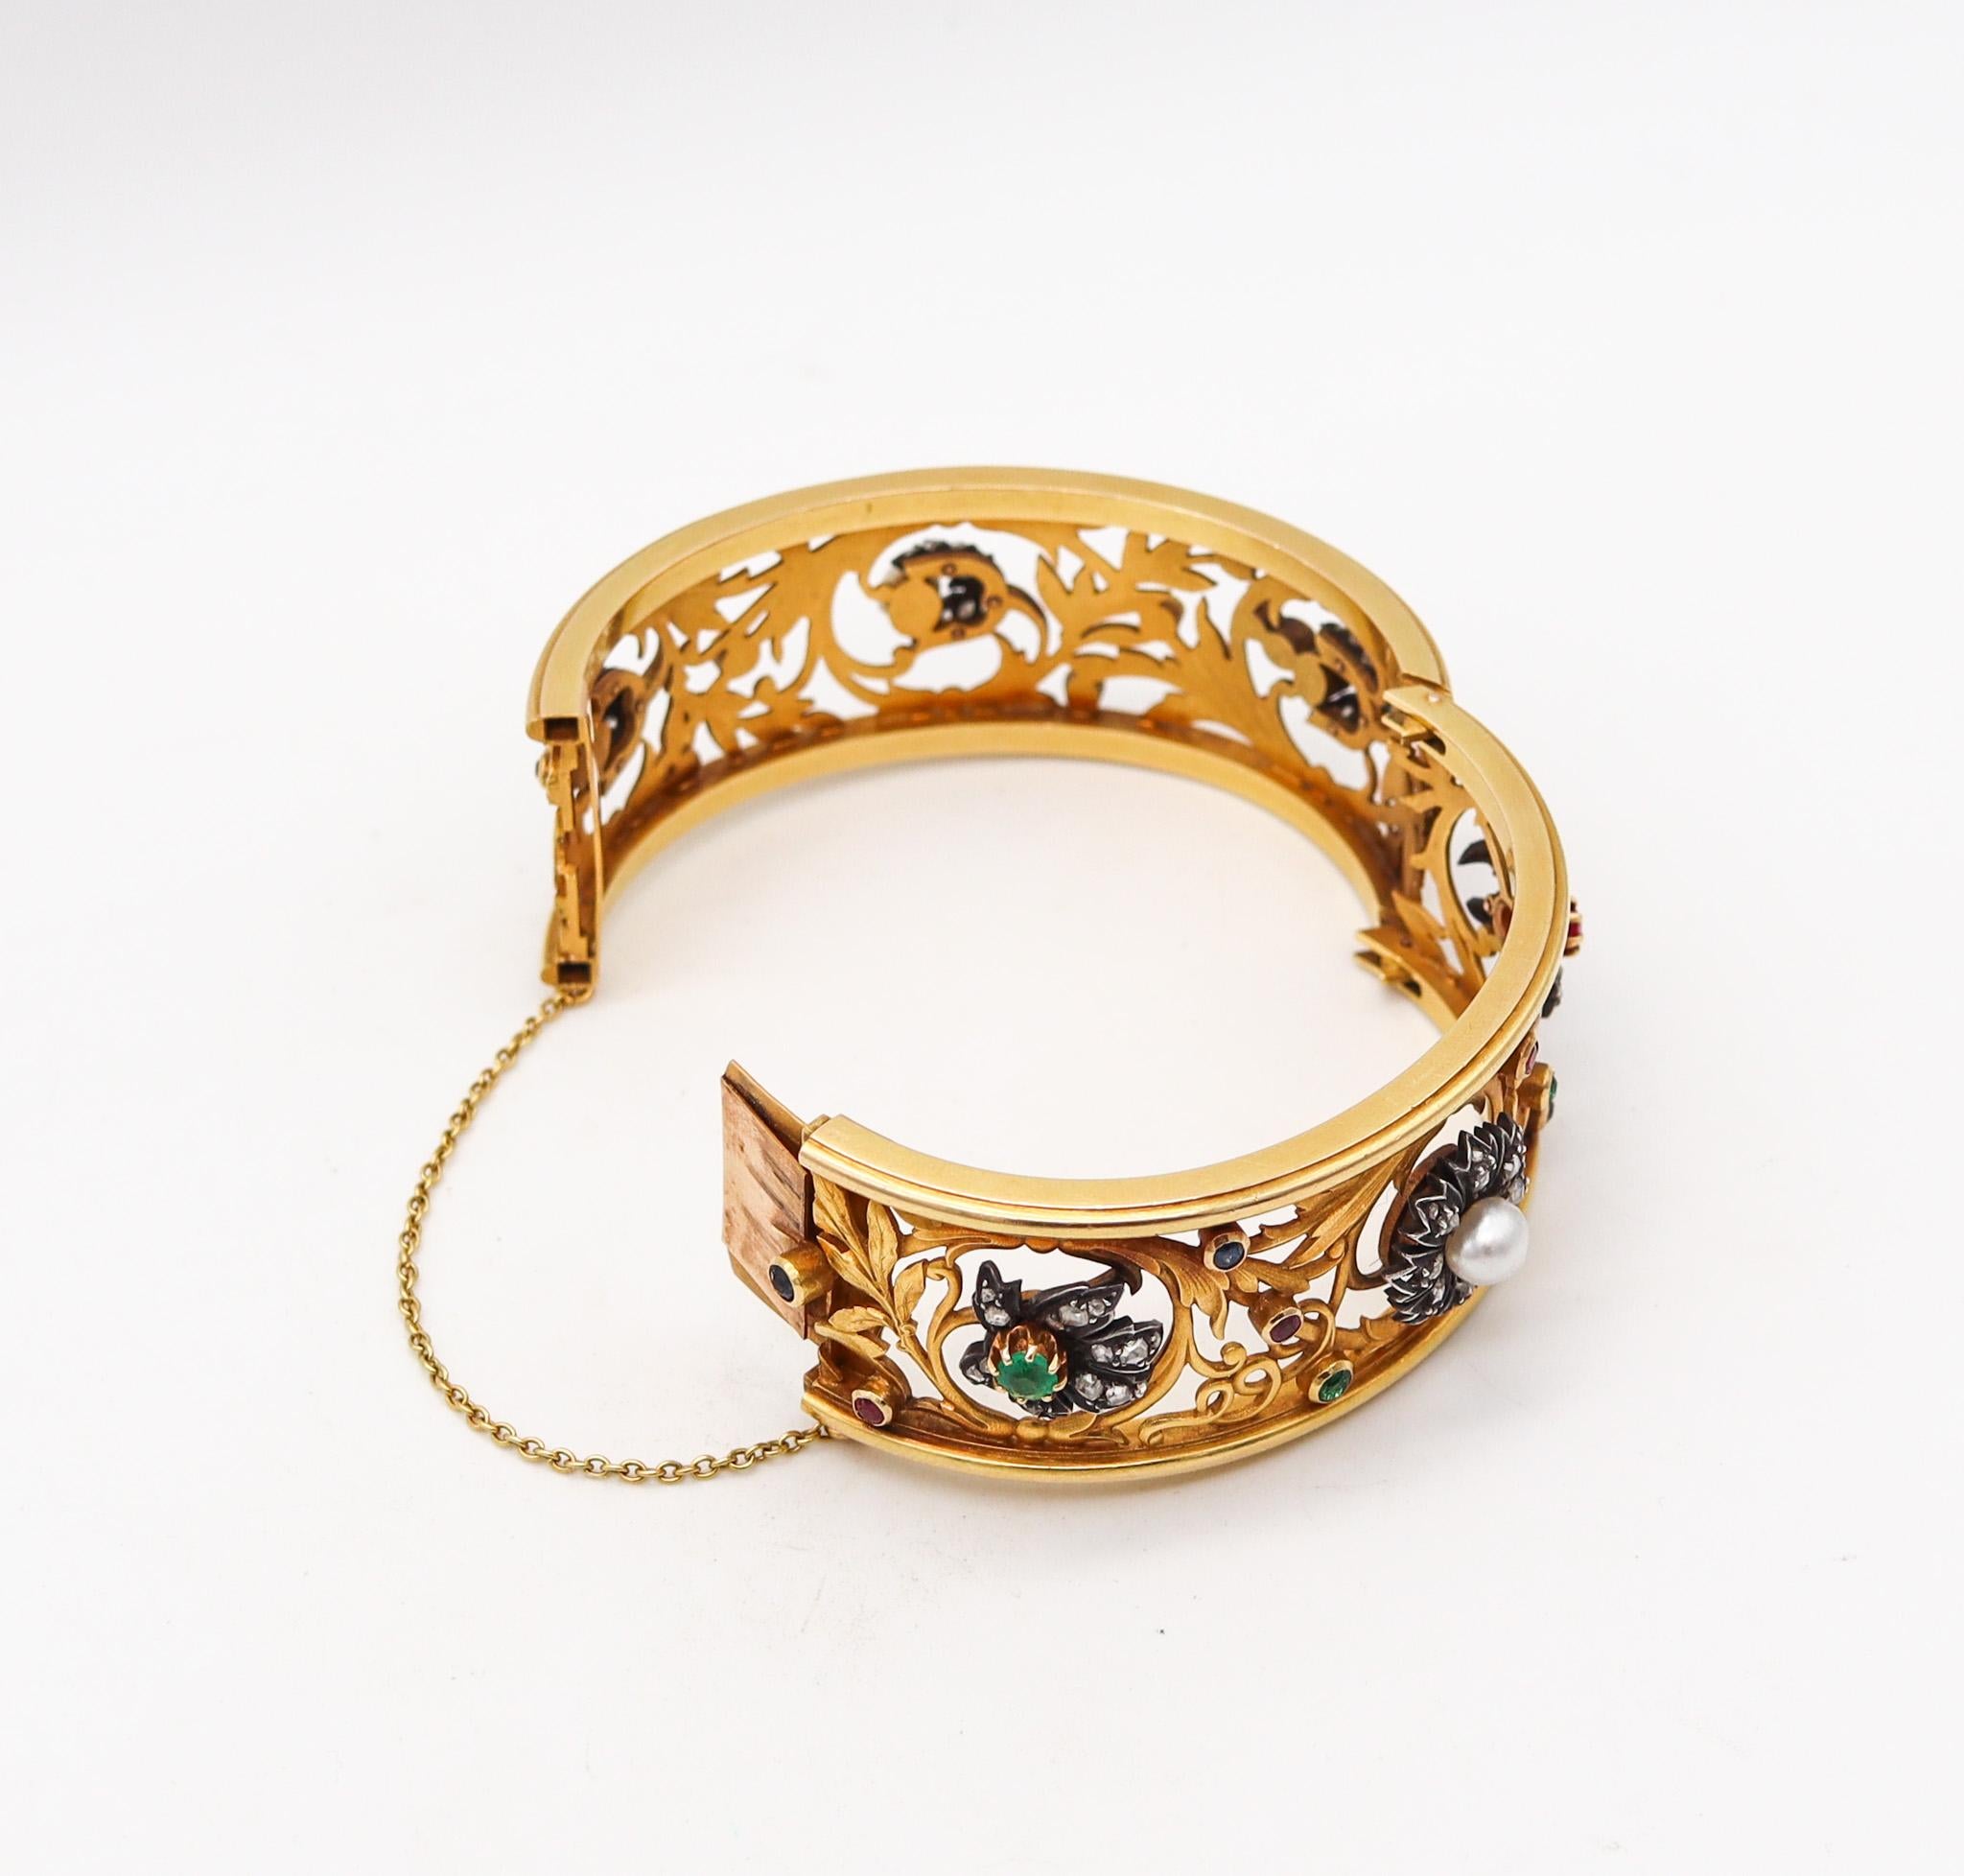 French 1890 Art Nouveau Bangle Bracelet In 18Kt Yellow Gold With Gemstones In Excellent Condition For Sale In Miami, FL